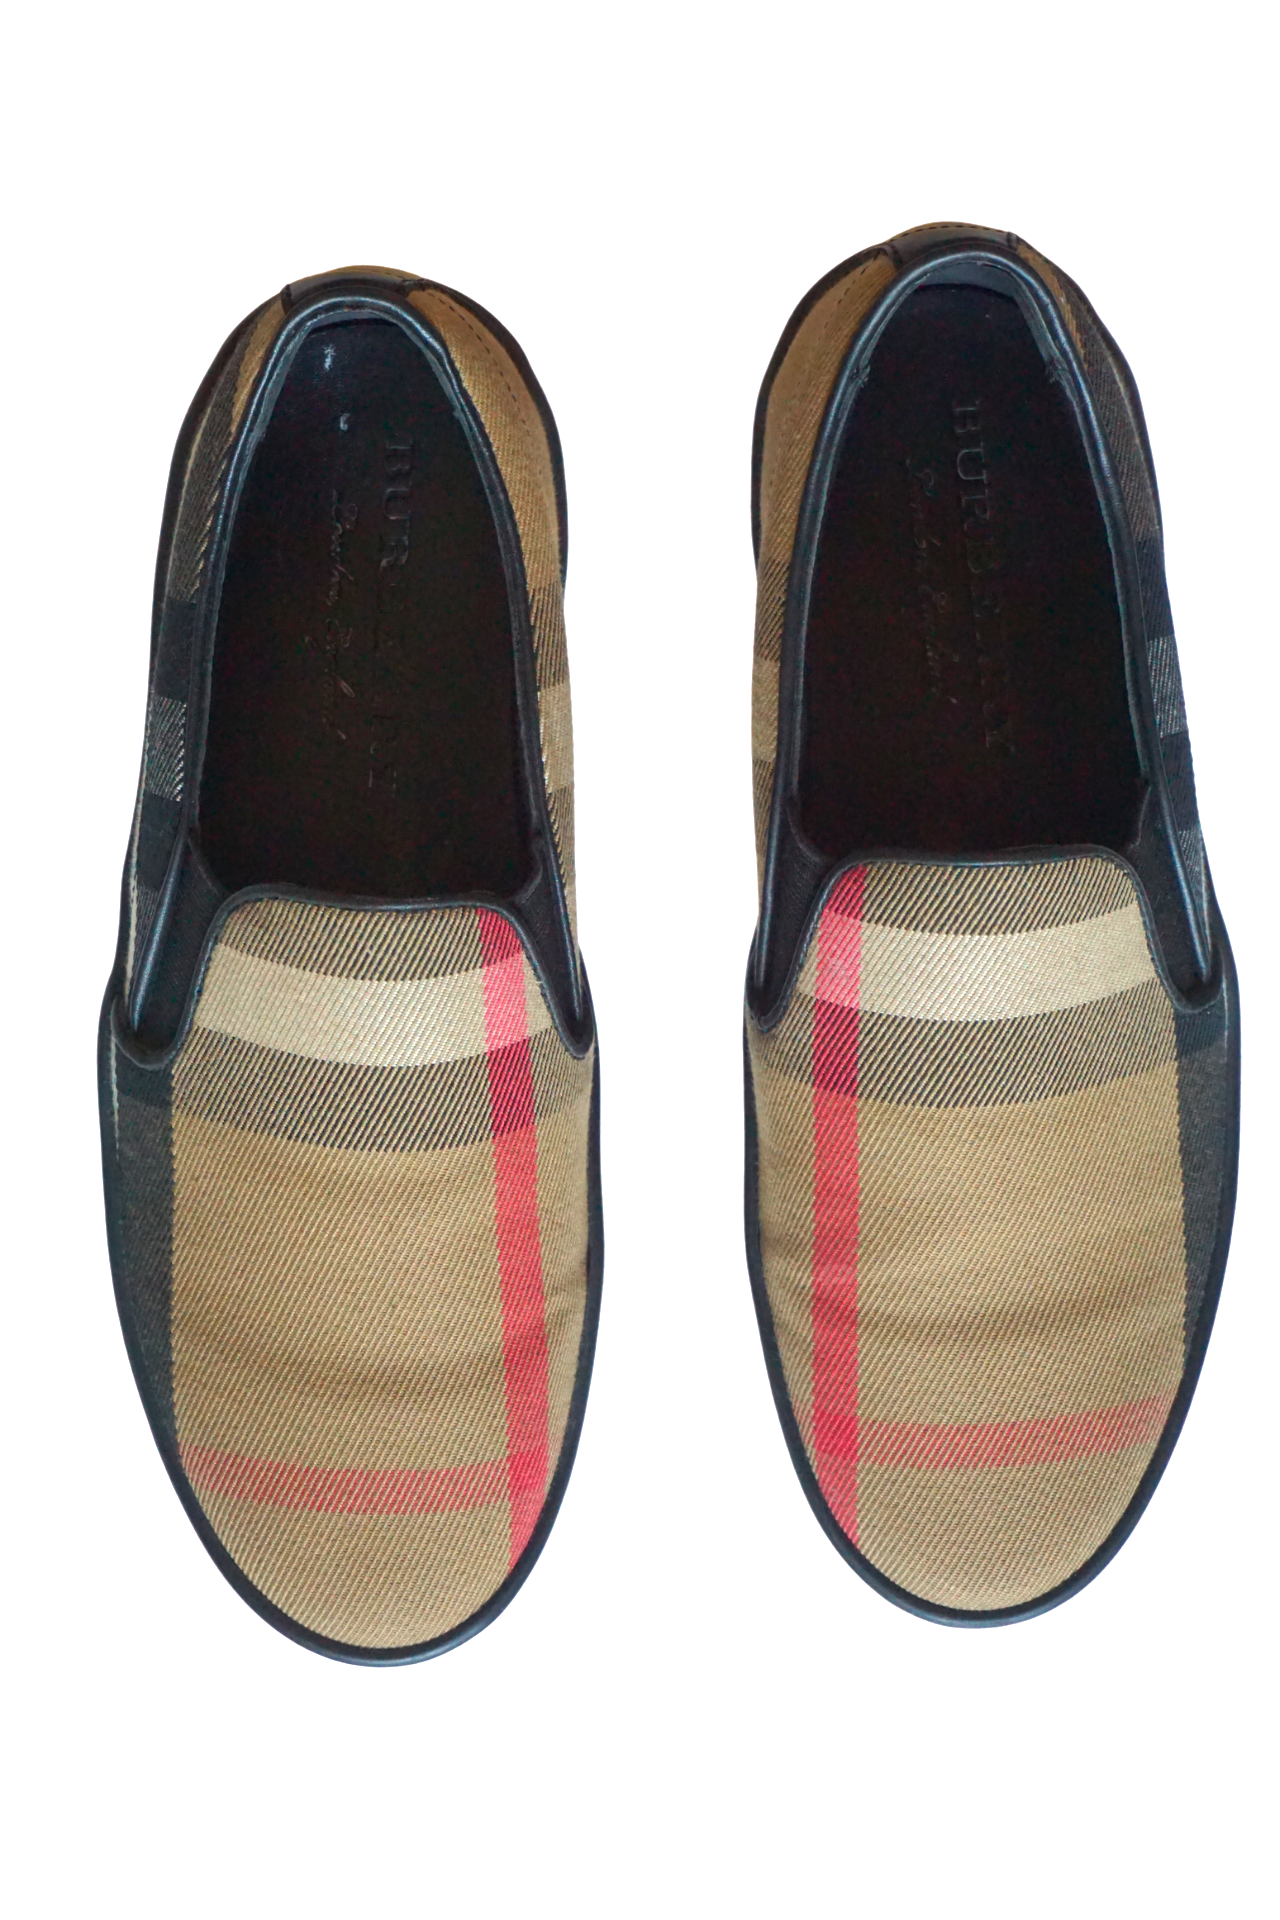 Burberry House Check Canvas Slip On Sneakers Size 36